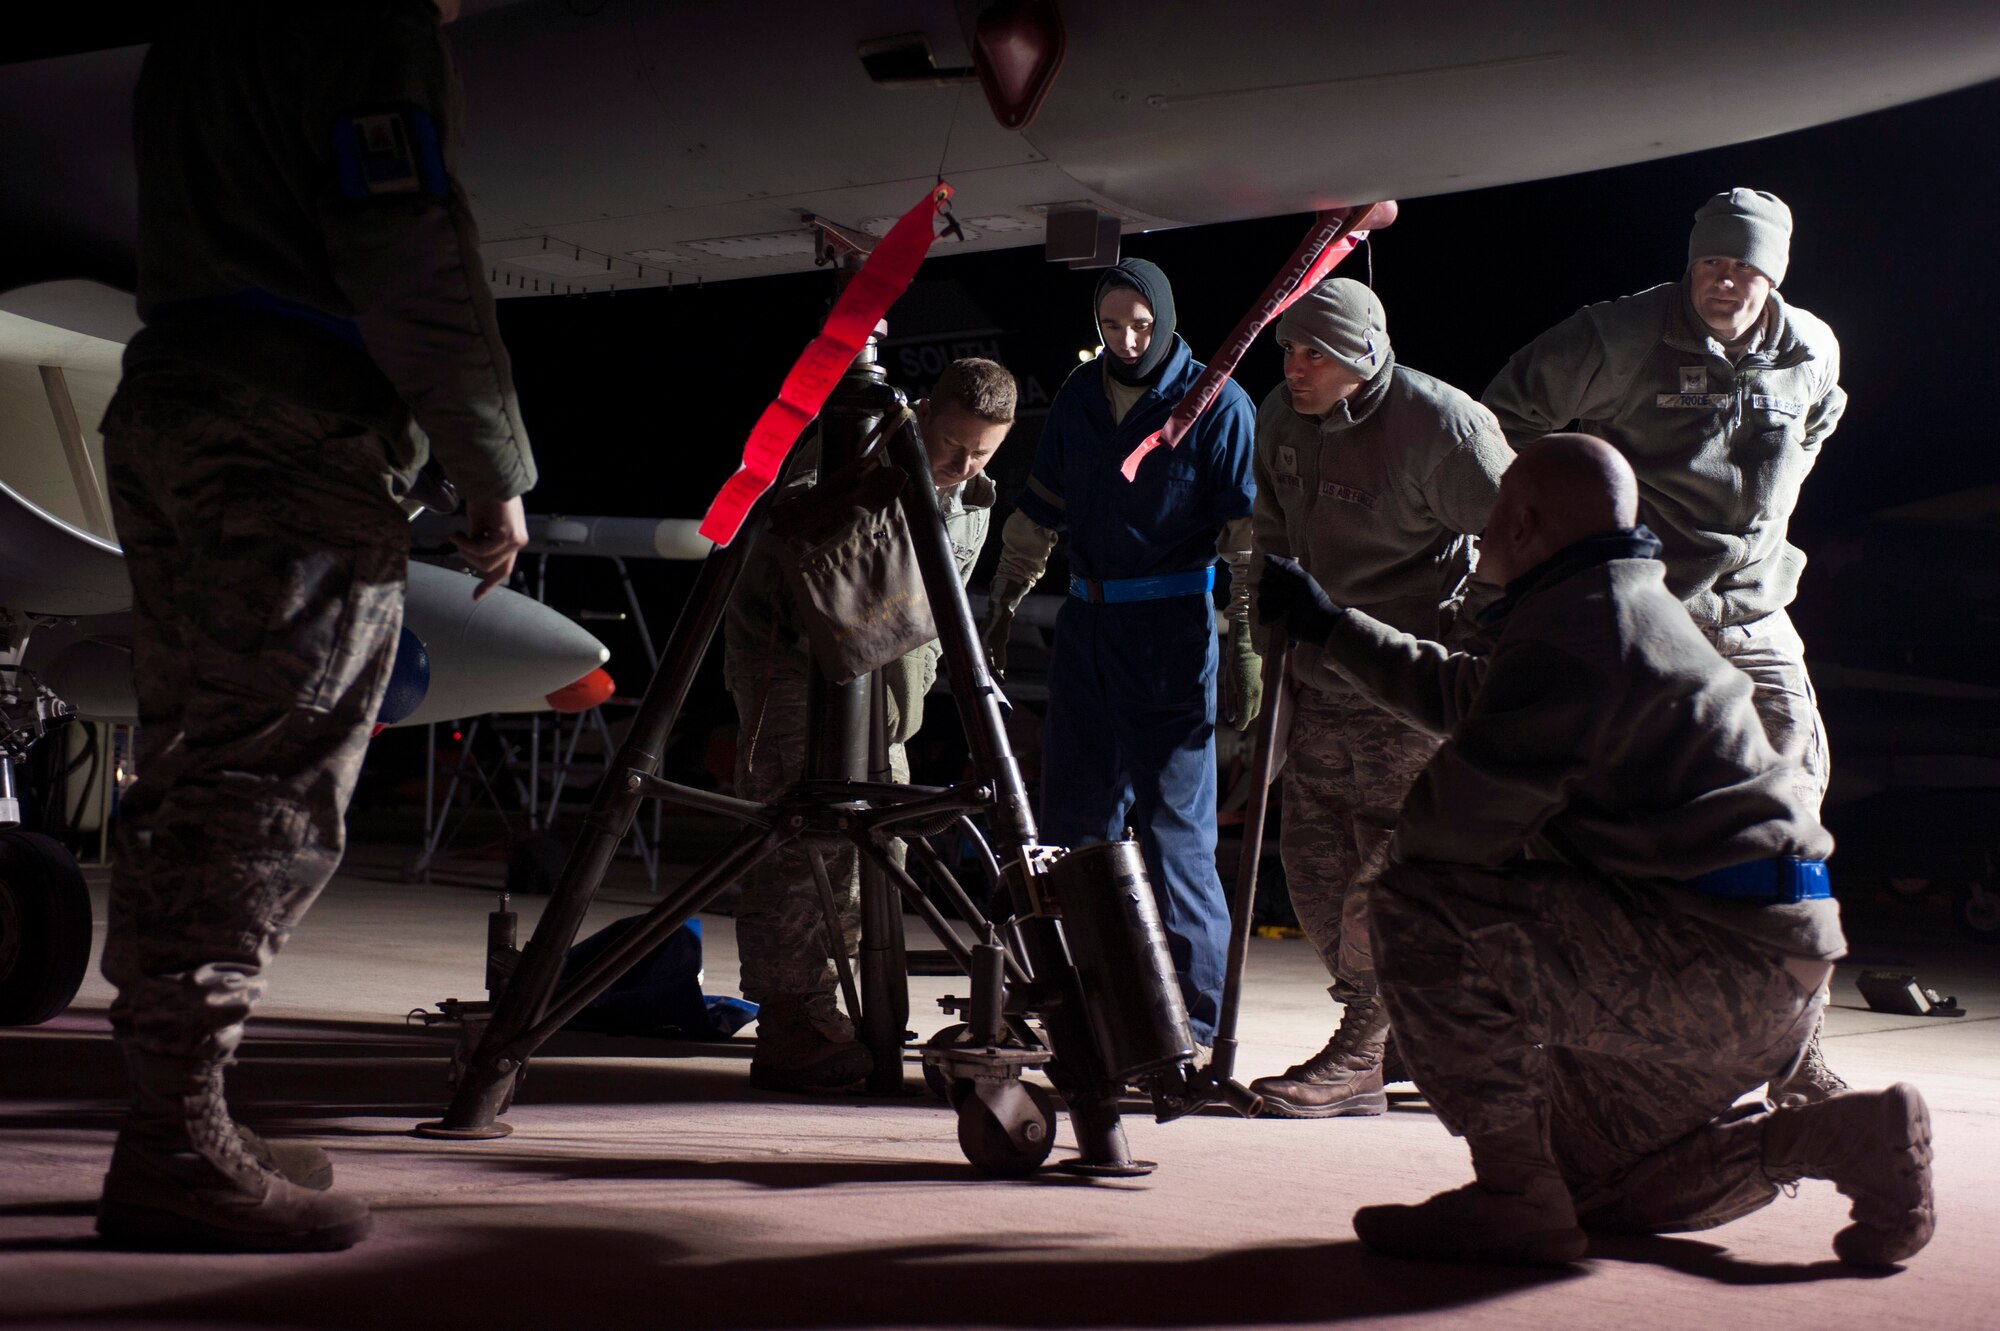 Airmen assigned to the 169th Aircraft Maintenance Squadron at McEntire Joint National Guard Base, S.C., safely lift an F-16 Fighting Falcon during Red Flag 16-1 on the flightline at Nellis Air Force Base, Nev., Feb. 2, 2016. To perform the final check of the inspection, the aircraft must be lifted off the ground. (U.S. Air Force photo by Senior Airman Mikaley Kline) 